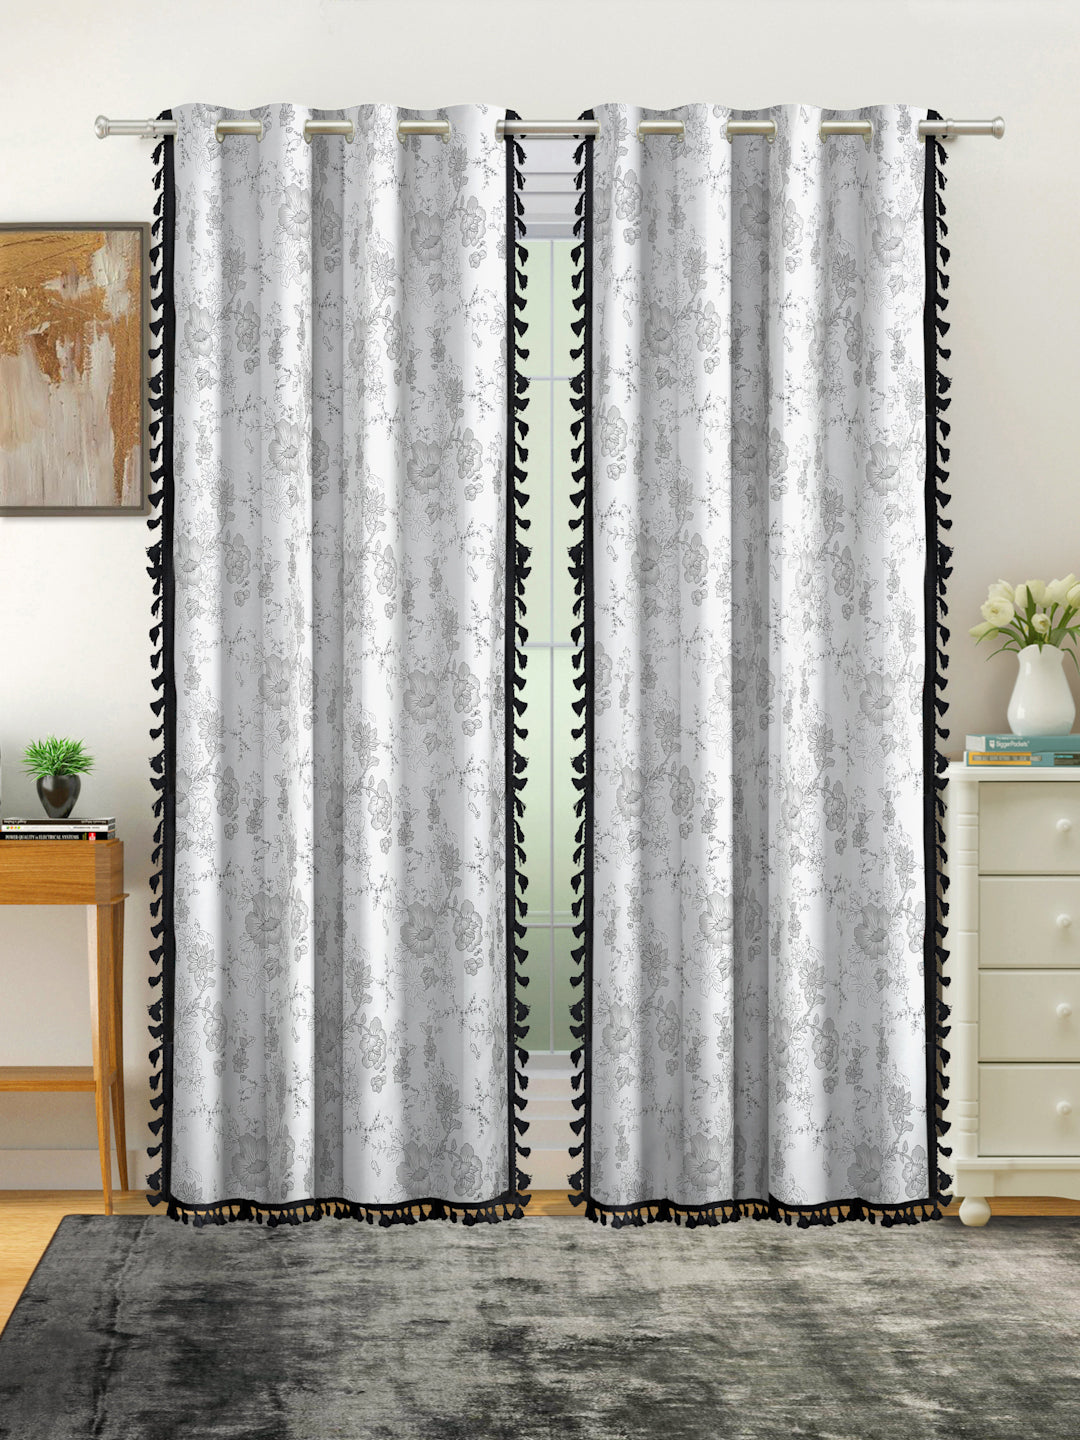 Cotton Printed Boho Light Filtering Door Curtain with Lace- Cream (Pack of 1)